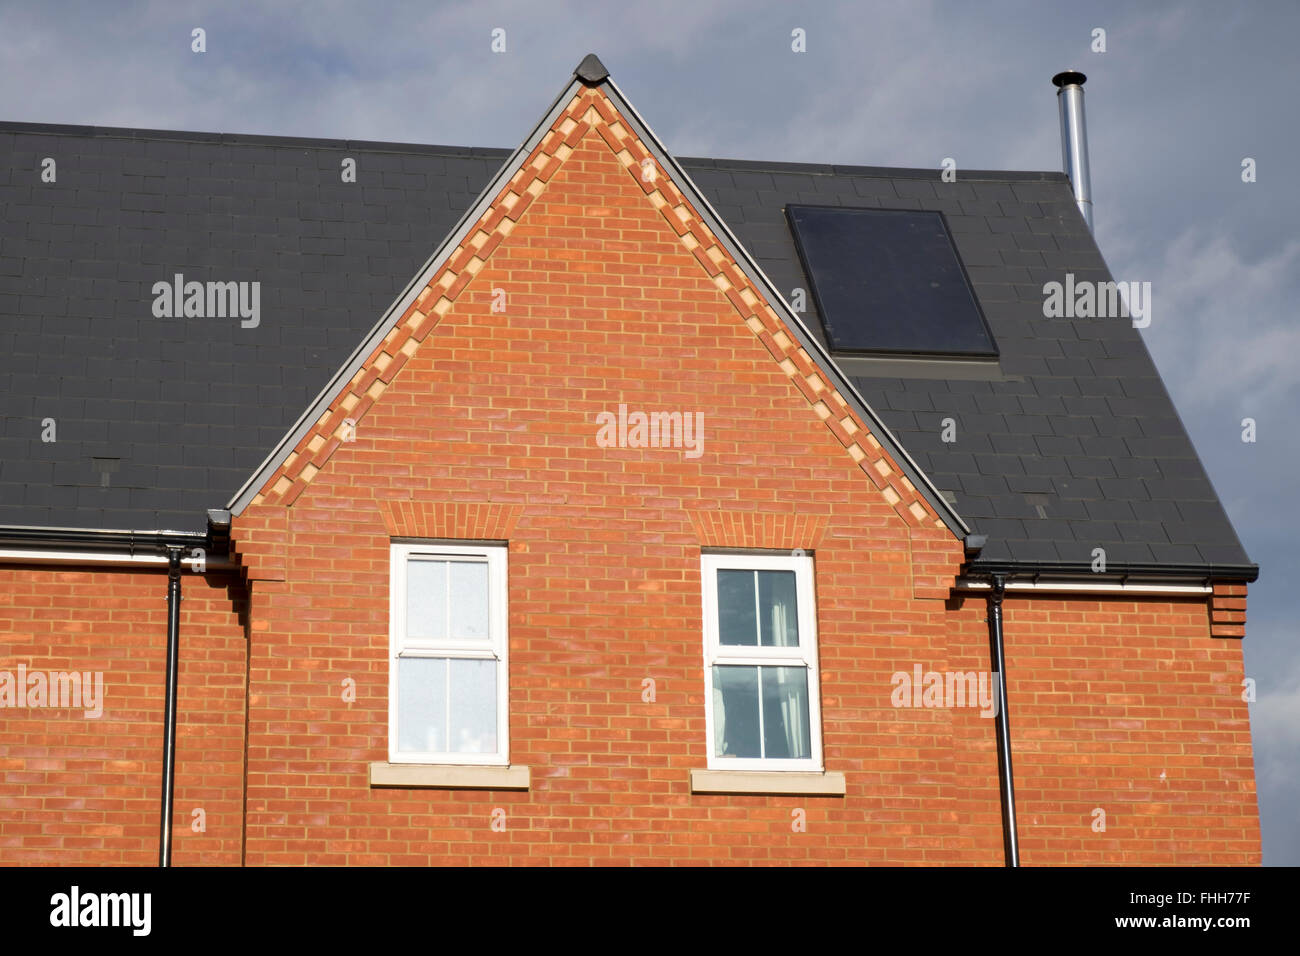 Residential property with built-in solar energy panels Ipswich Suffolk UK Stock Photo